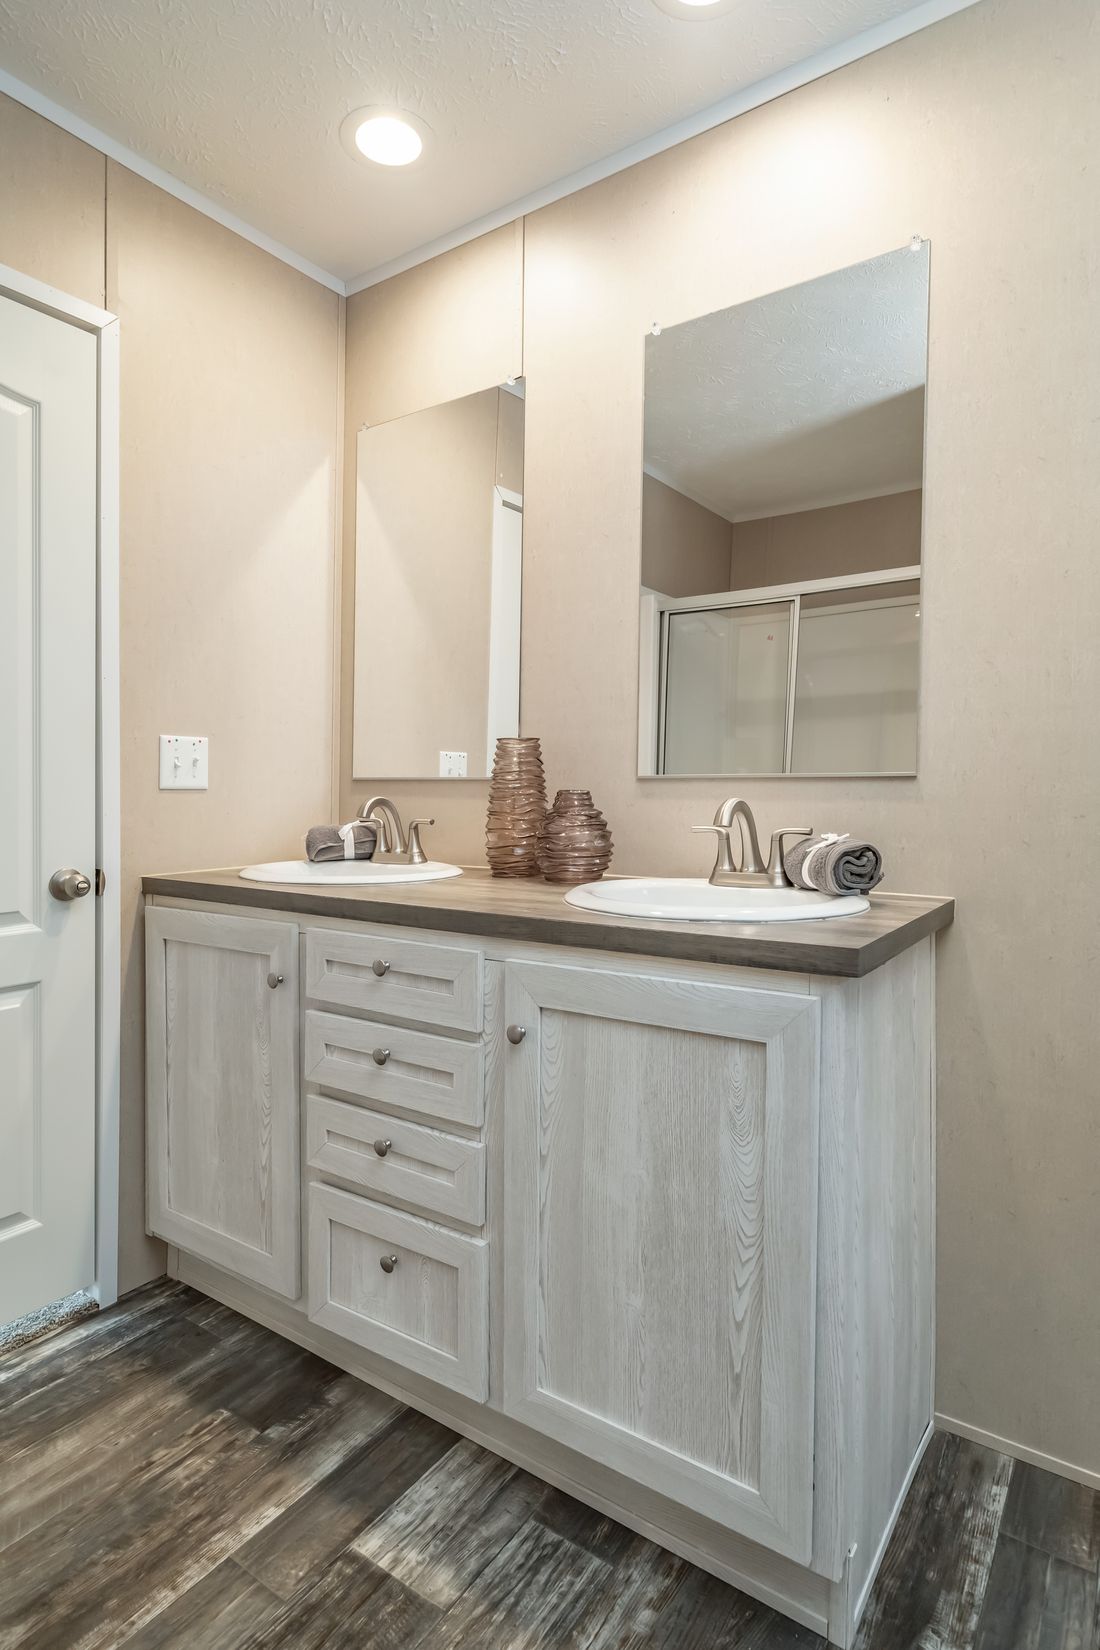 The ULTRA PRO 56B Master Bathroom. This Manufactured Mobile Home features 3 bedrooms and 2 baths.